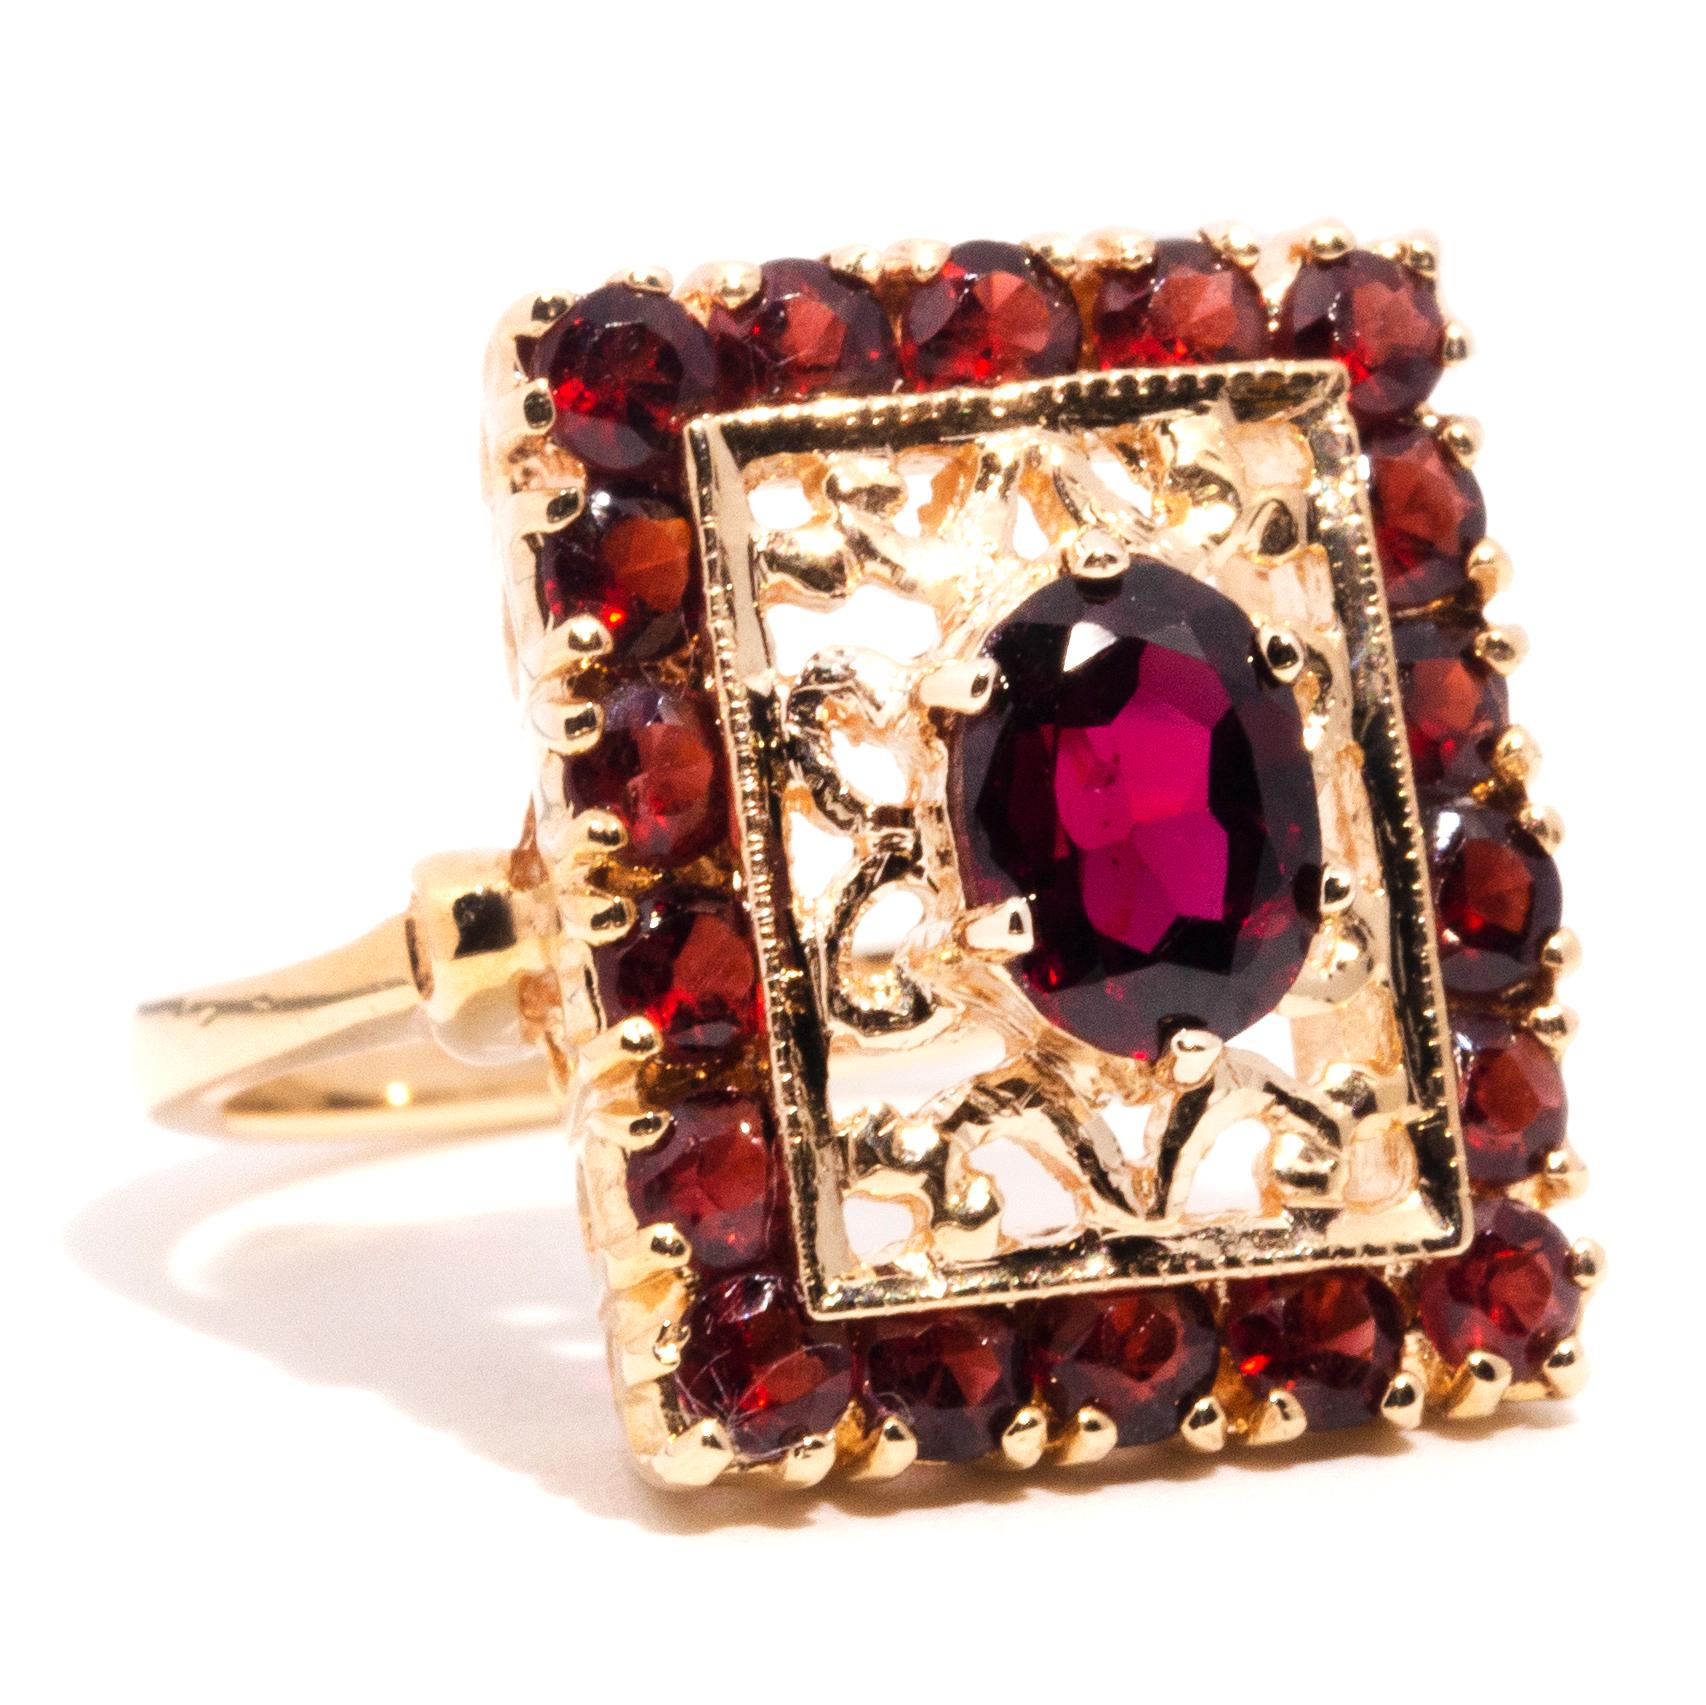 Crafted with 9ct yellow gold, this ornate vintage halo ring features a gorgeous filigree gallery home to an alluring oval faceted garnet encompassed by a rectangular halo border of smaller shimmering garnets. We have named this vintage splendour The